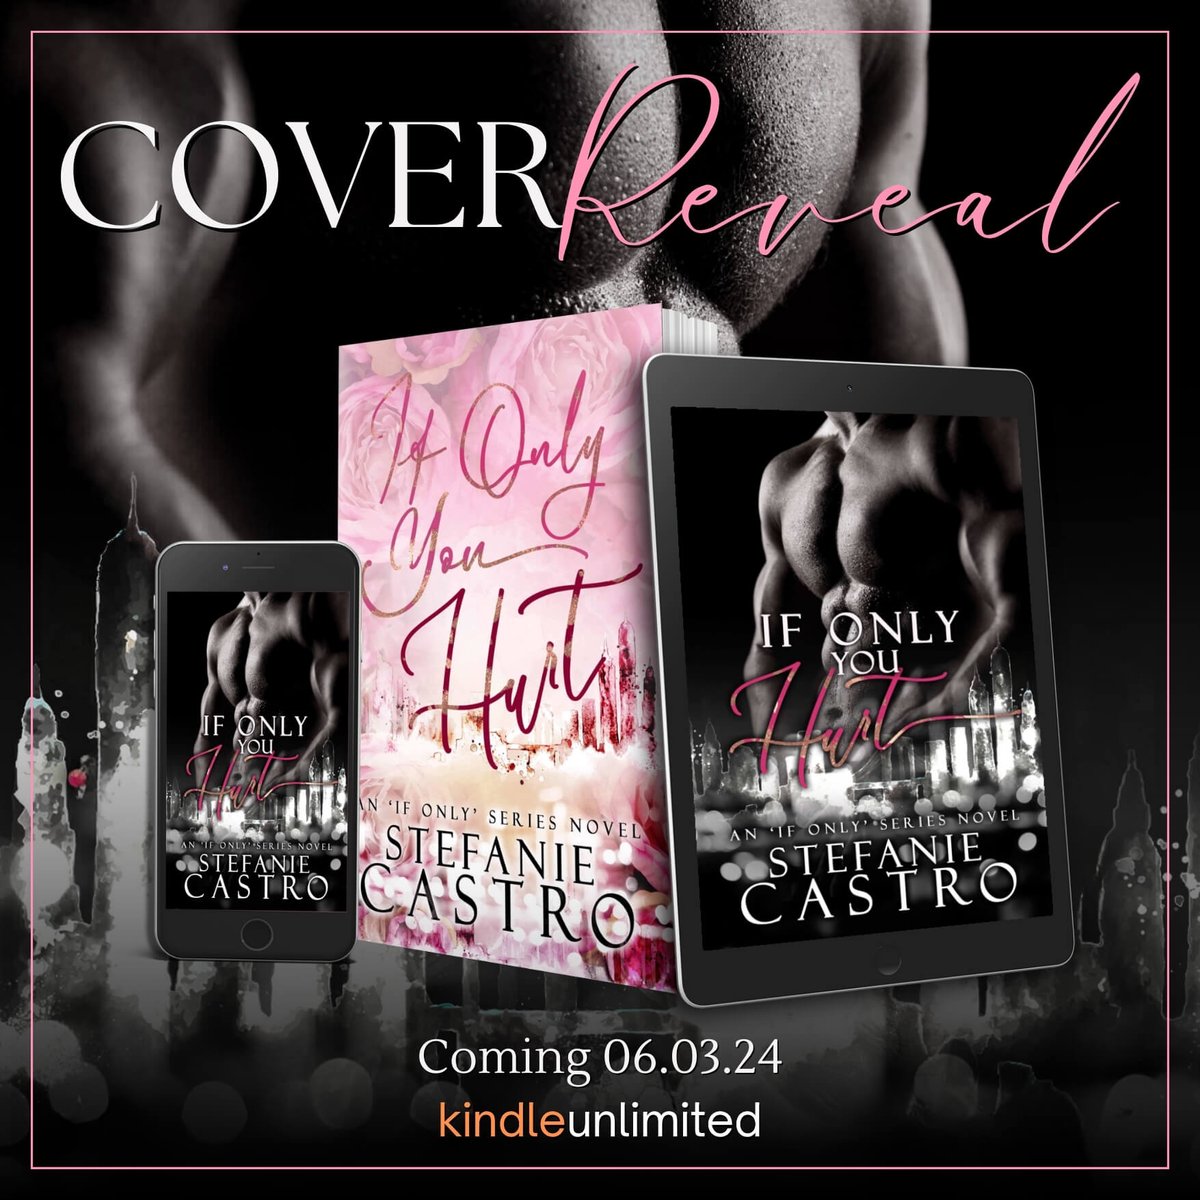 ✨Cover Reveal:
IF ONLY YOU HURT by #StefanieCastro releasing 6/3

#PreOrderNow
amzn.to/3vzLcRK 
#bookish #theauthoragency

@theauthoragency